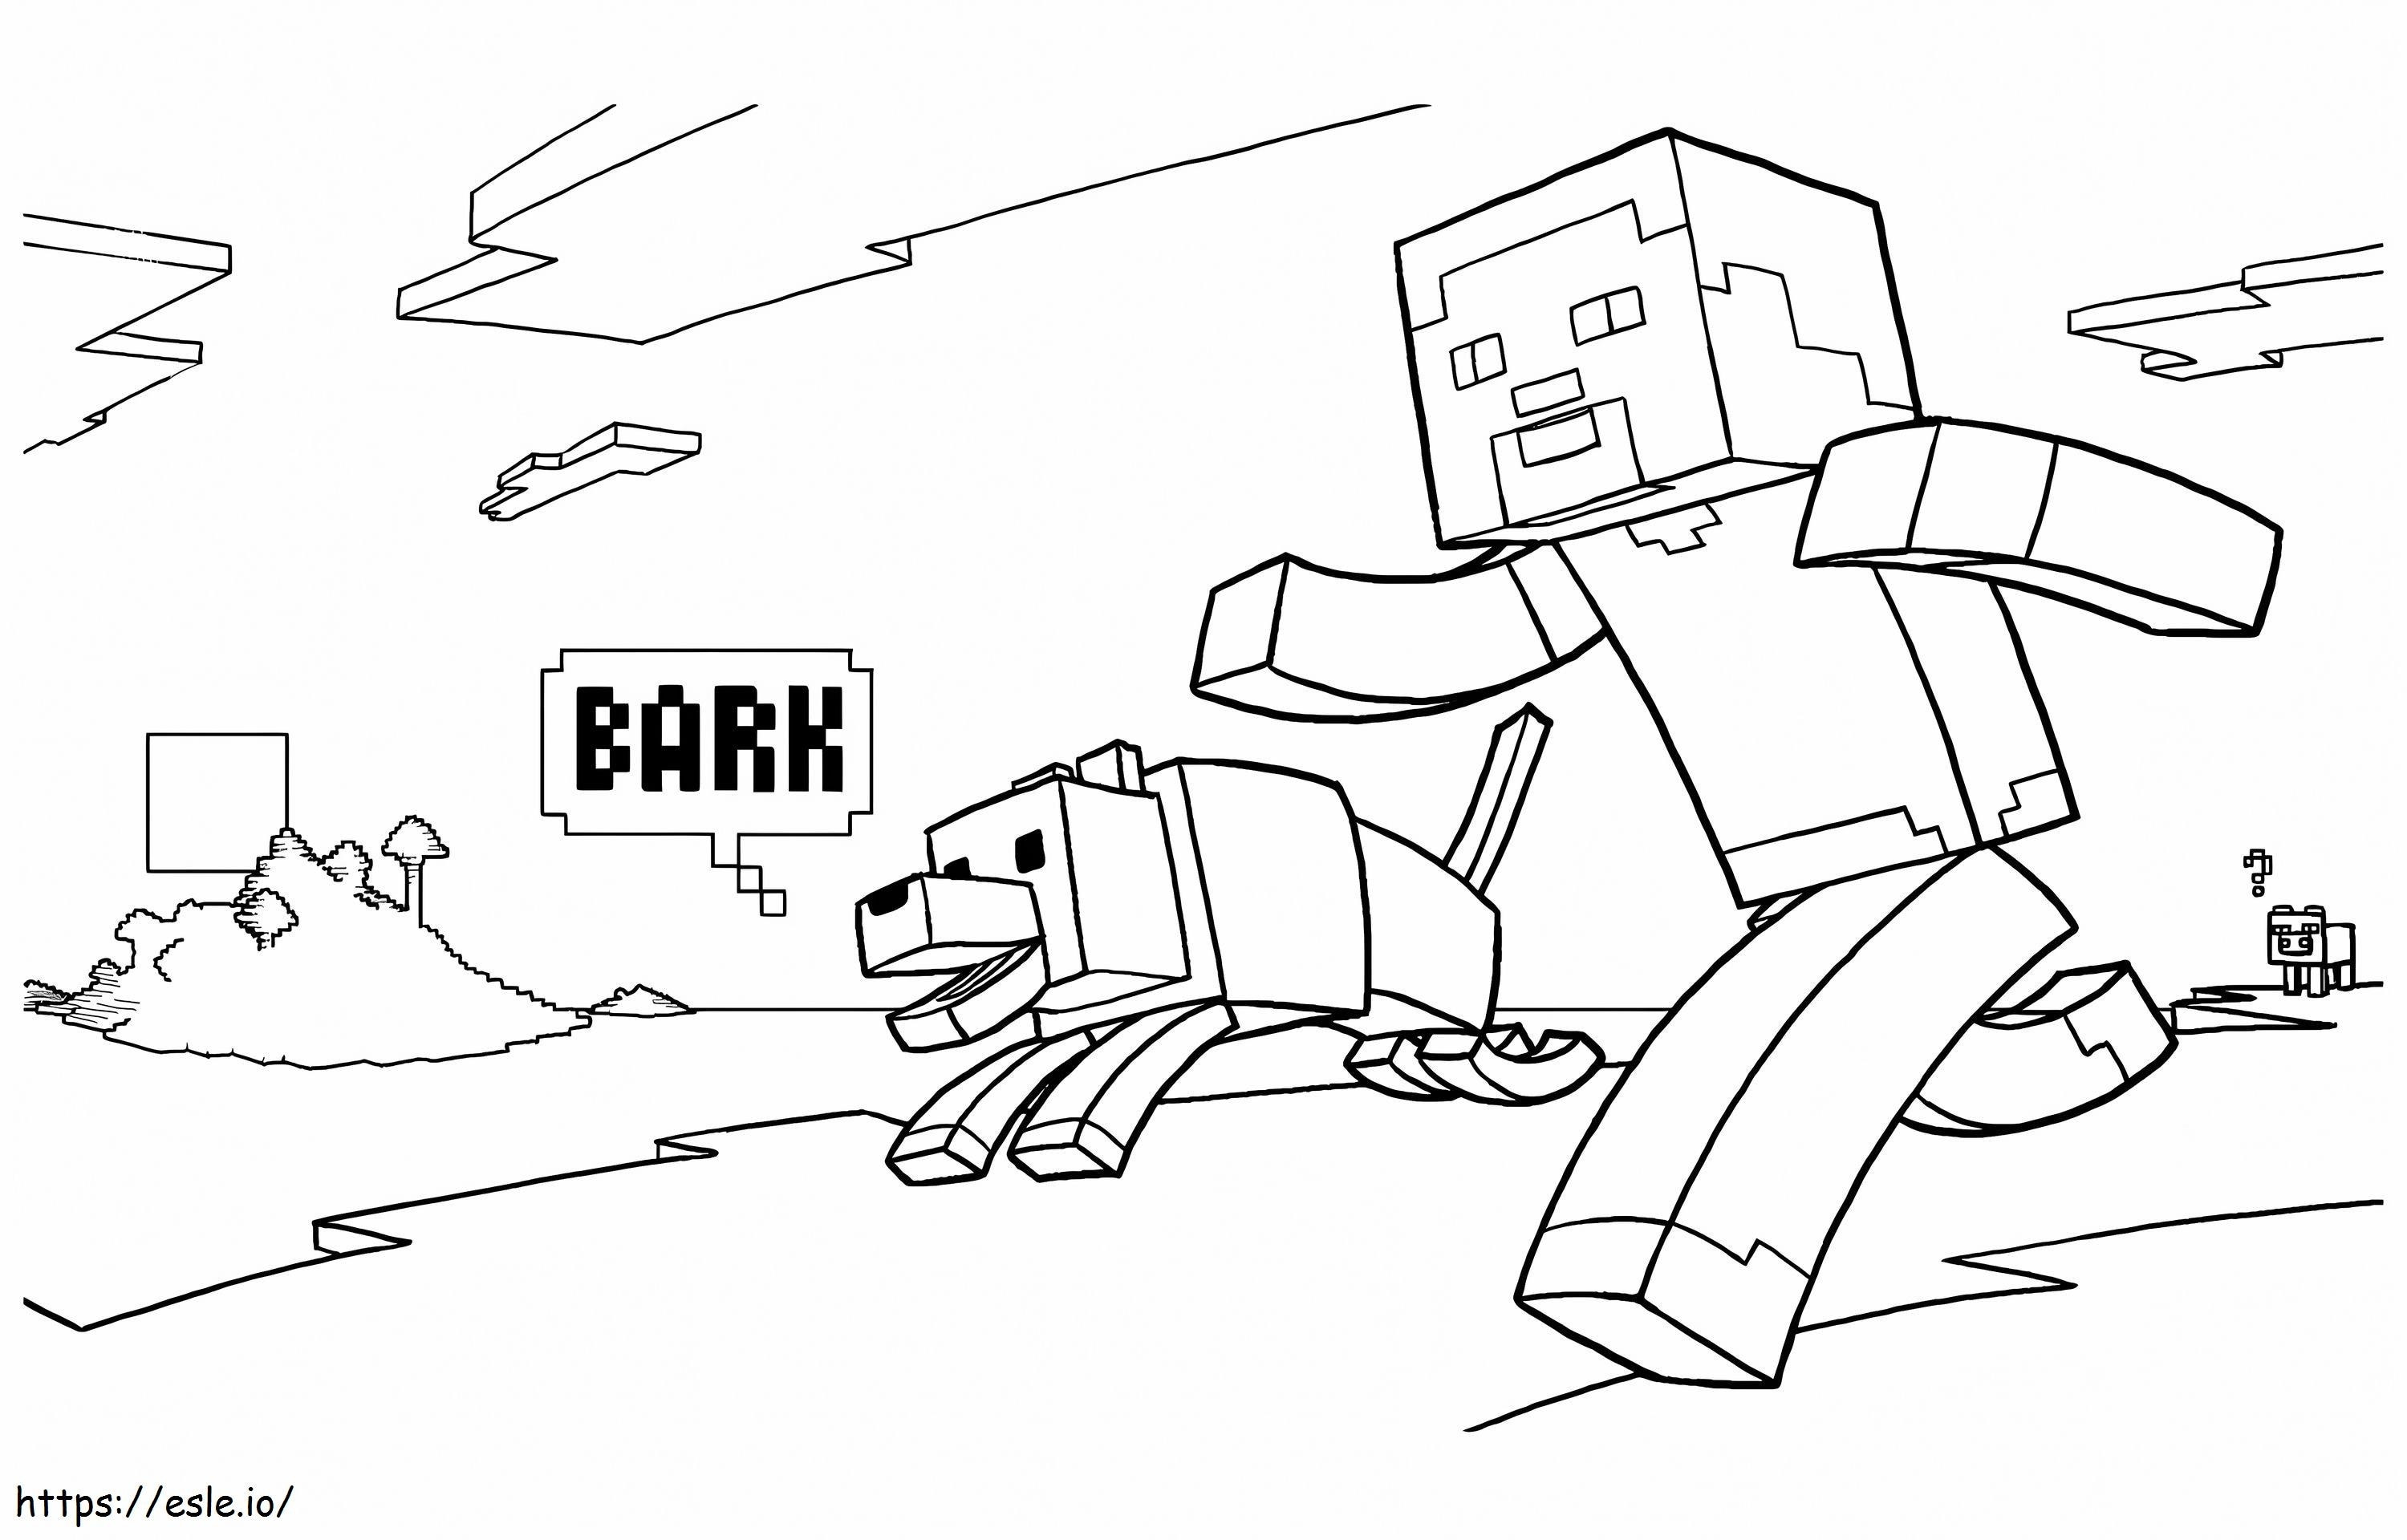 1548121386 Coloring For Kids Minecraft 71066 coloring page